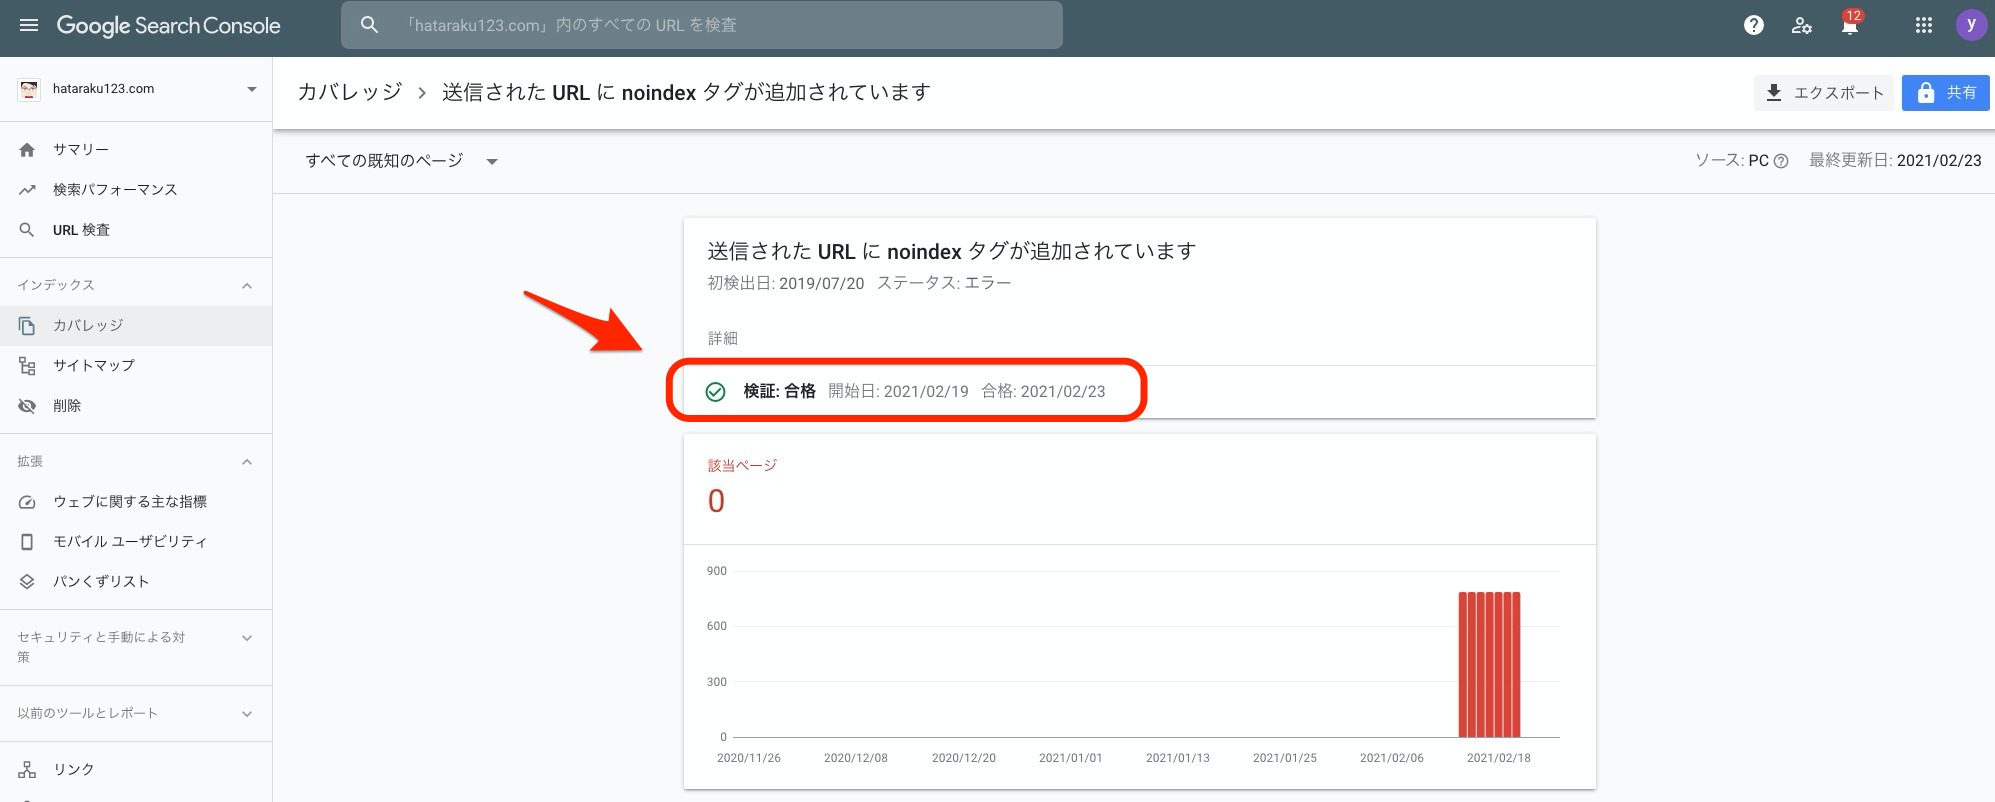 Google Search Console カバレッジ